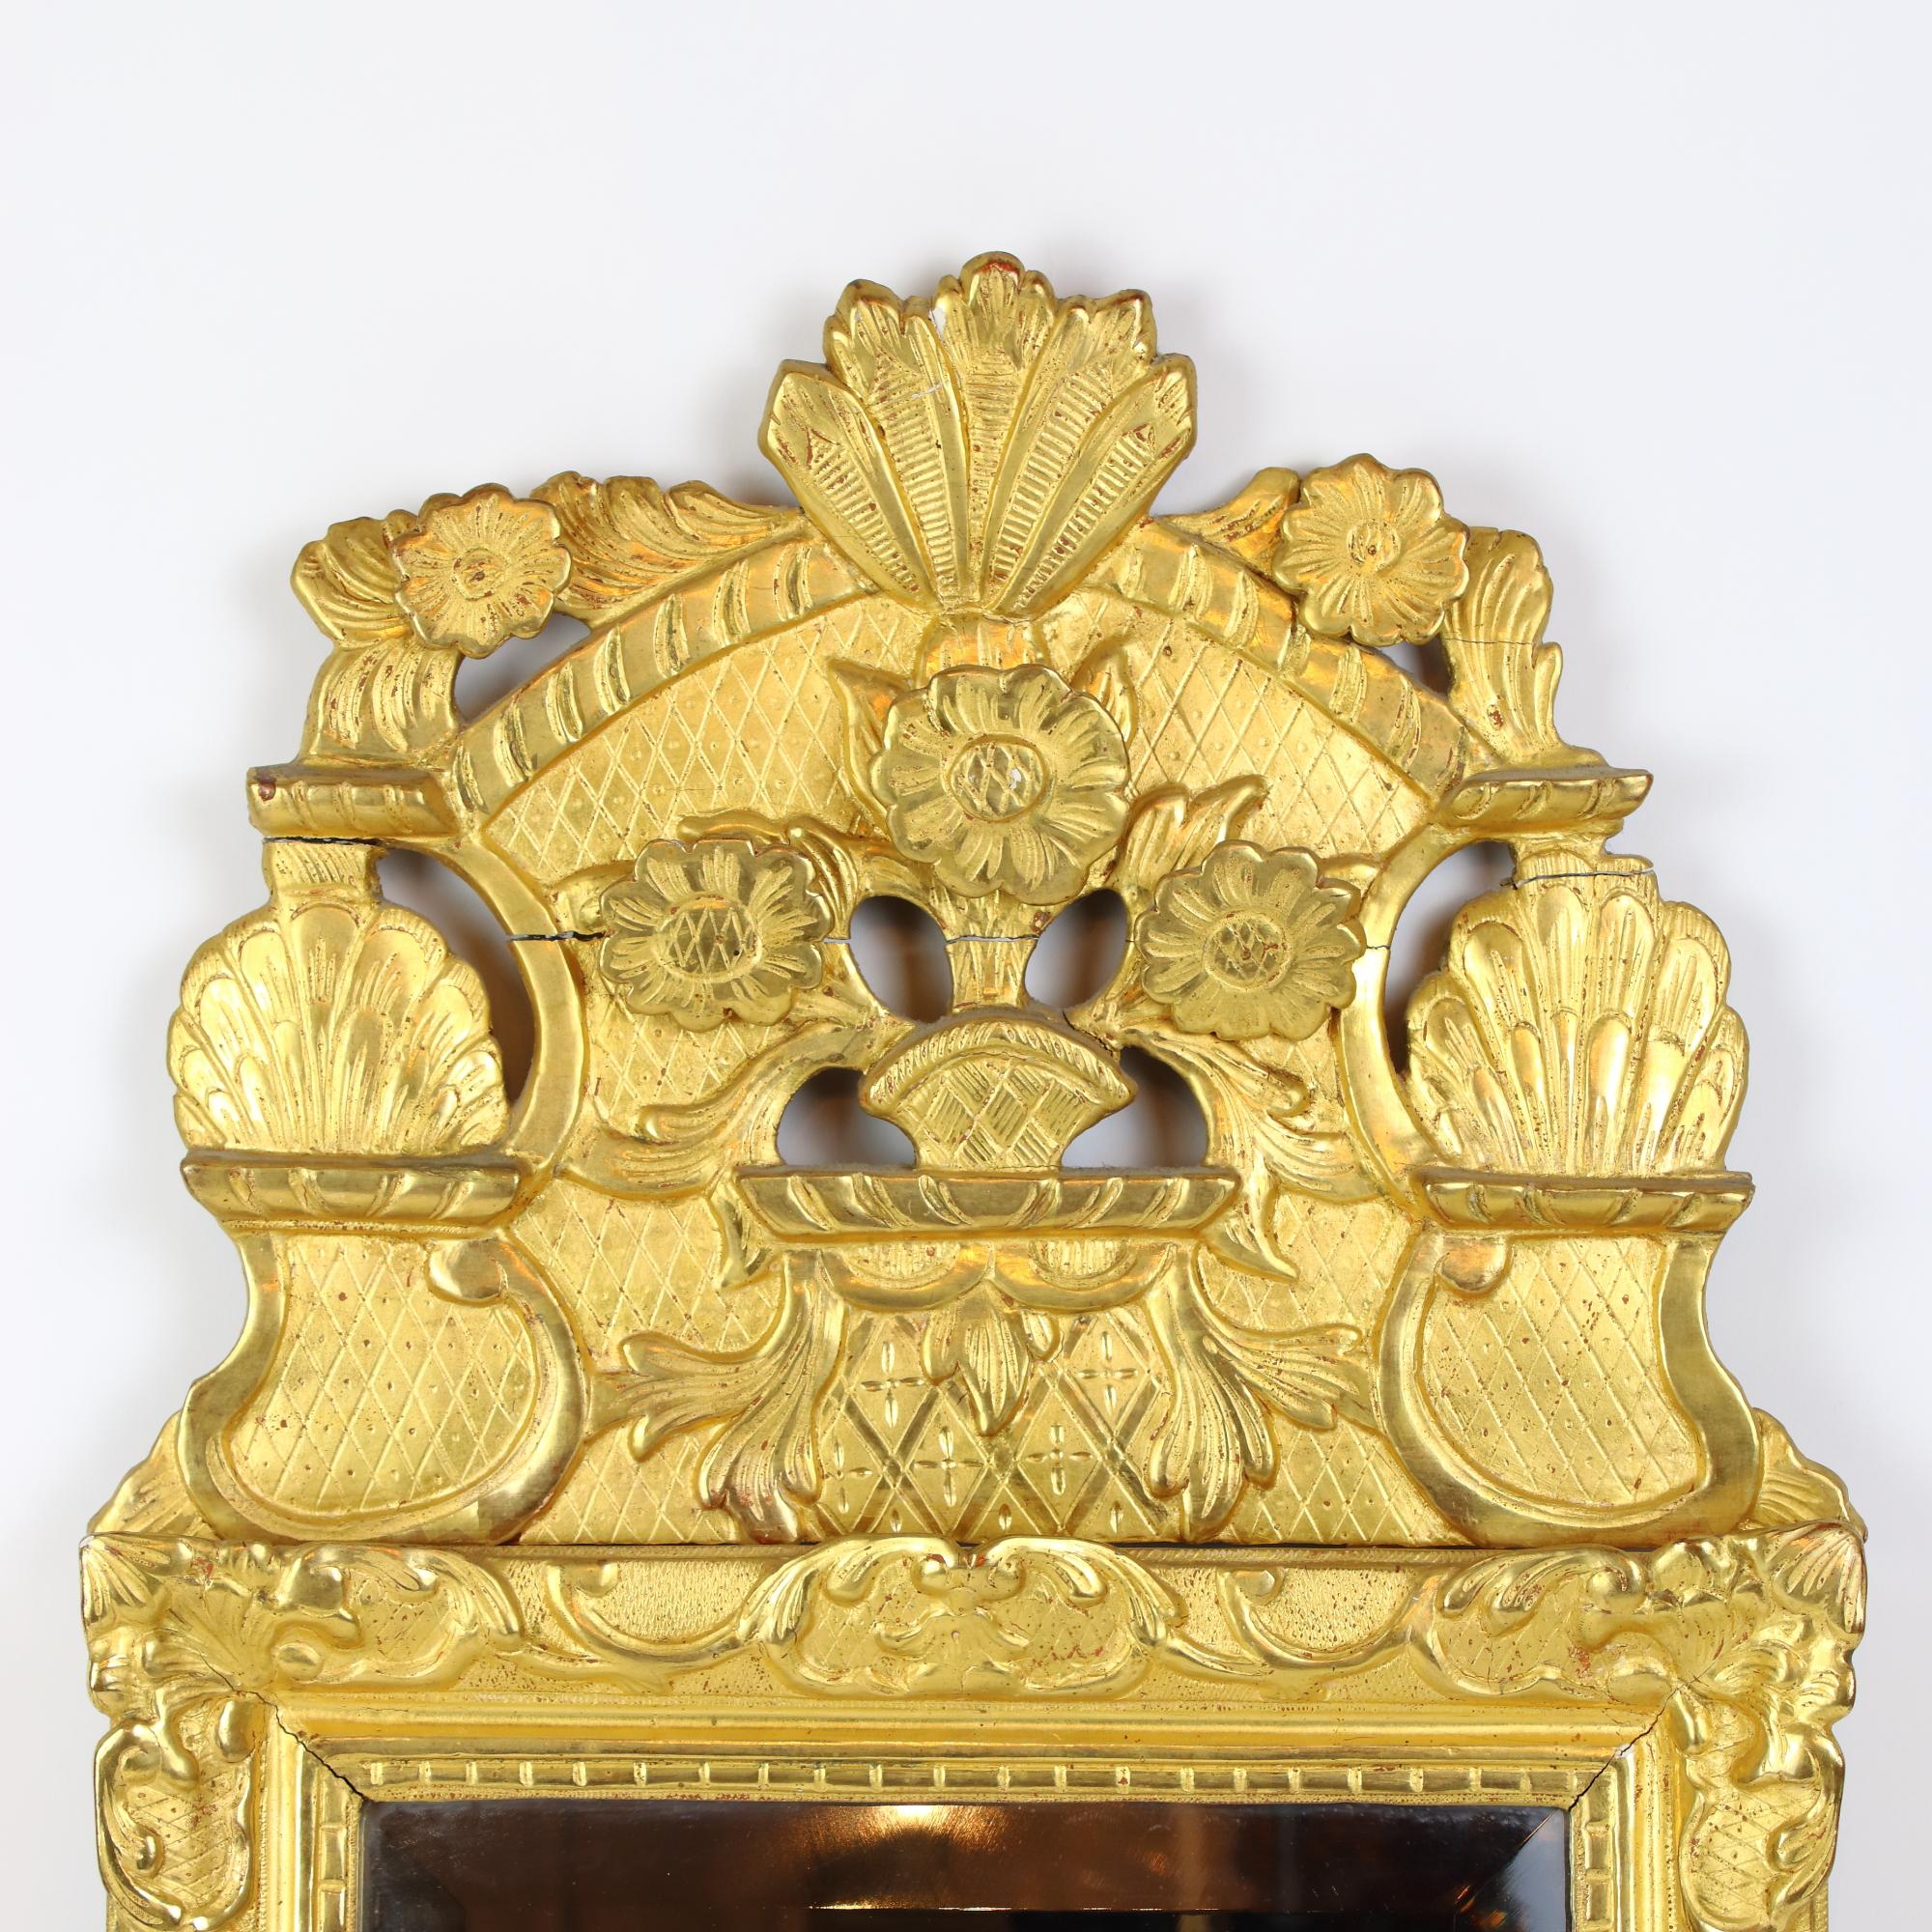 Early 18th century French Régence floral giltwood mirror.

An early 18th century Regence giltwood mirror holding a rectangular mirror glass (13.88 in. x 11.02 in. / 33.5 cm x 28 cm) within a giltwood frame adorned with a carved dart border and